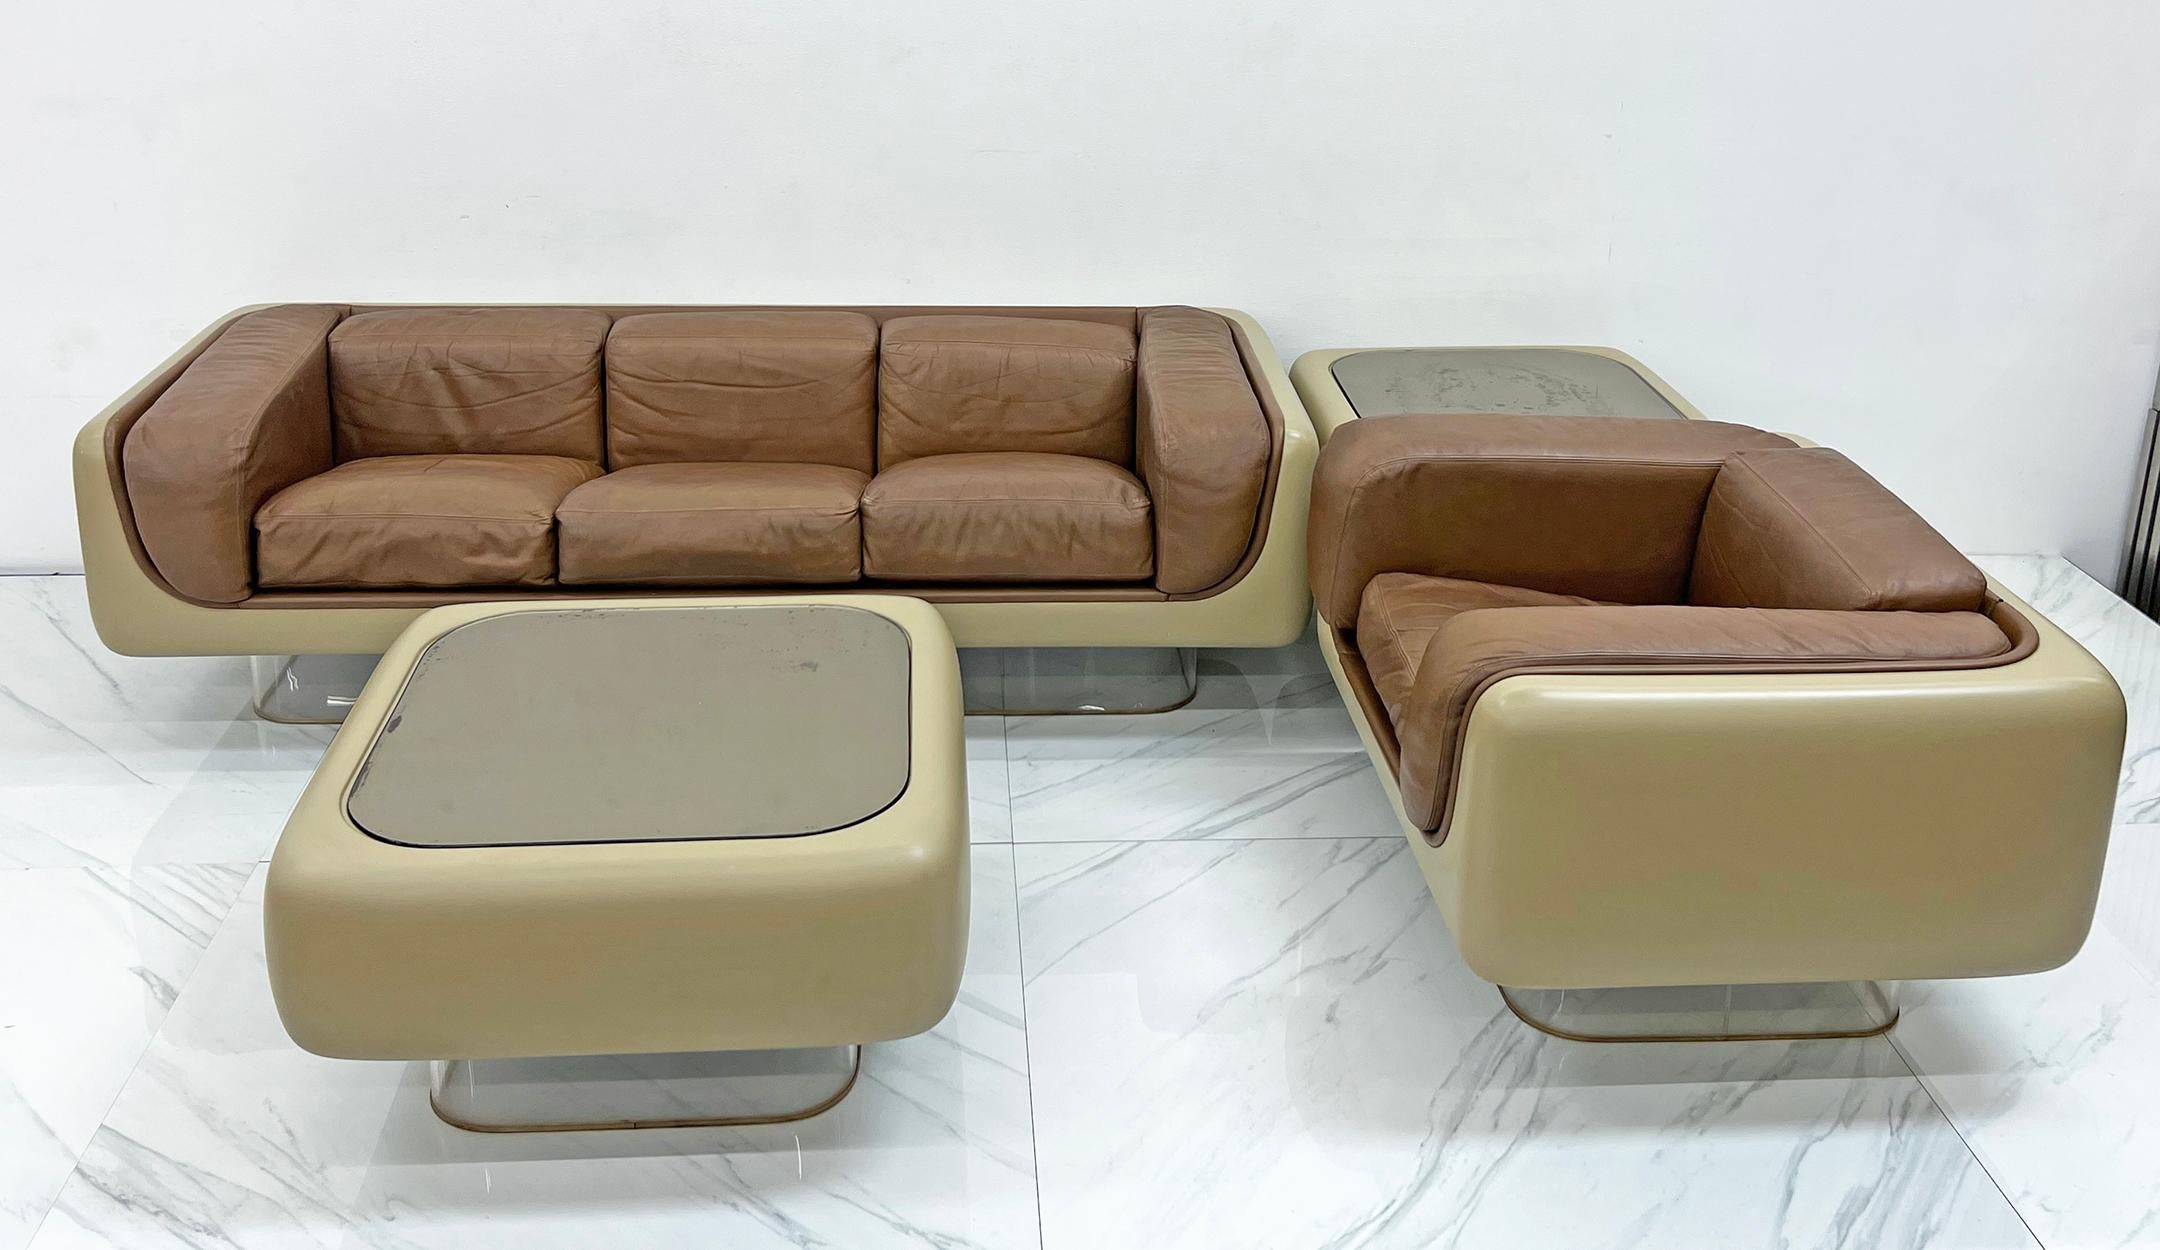 William Andrus for Steelcase Space Age, Sofa, Chair, Living Room Suite, 1970's 1